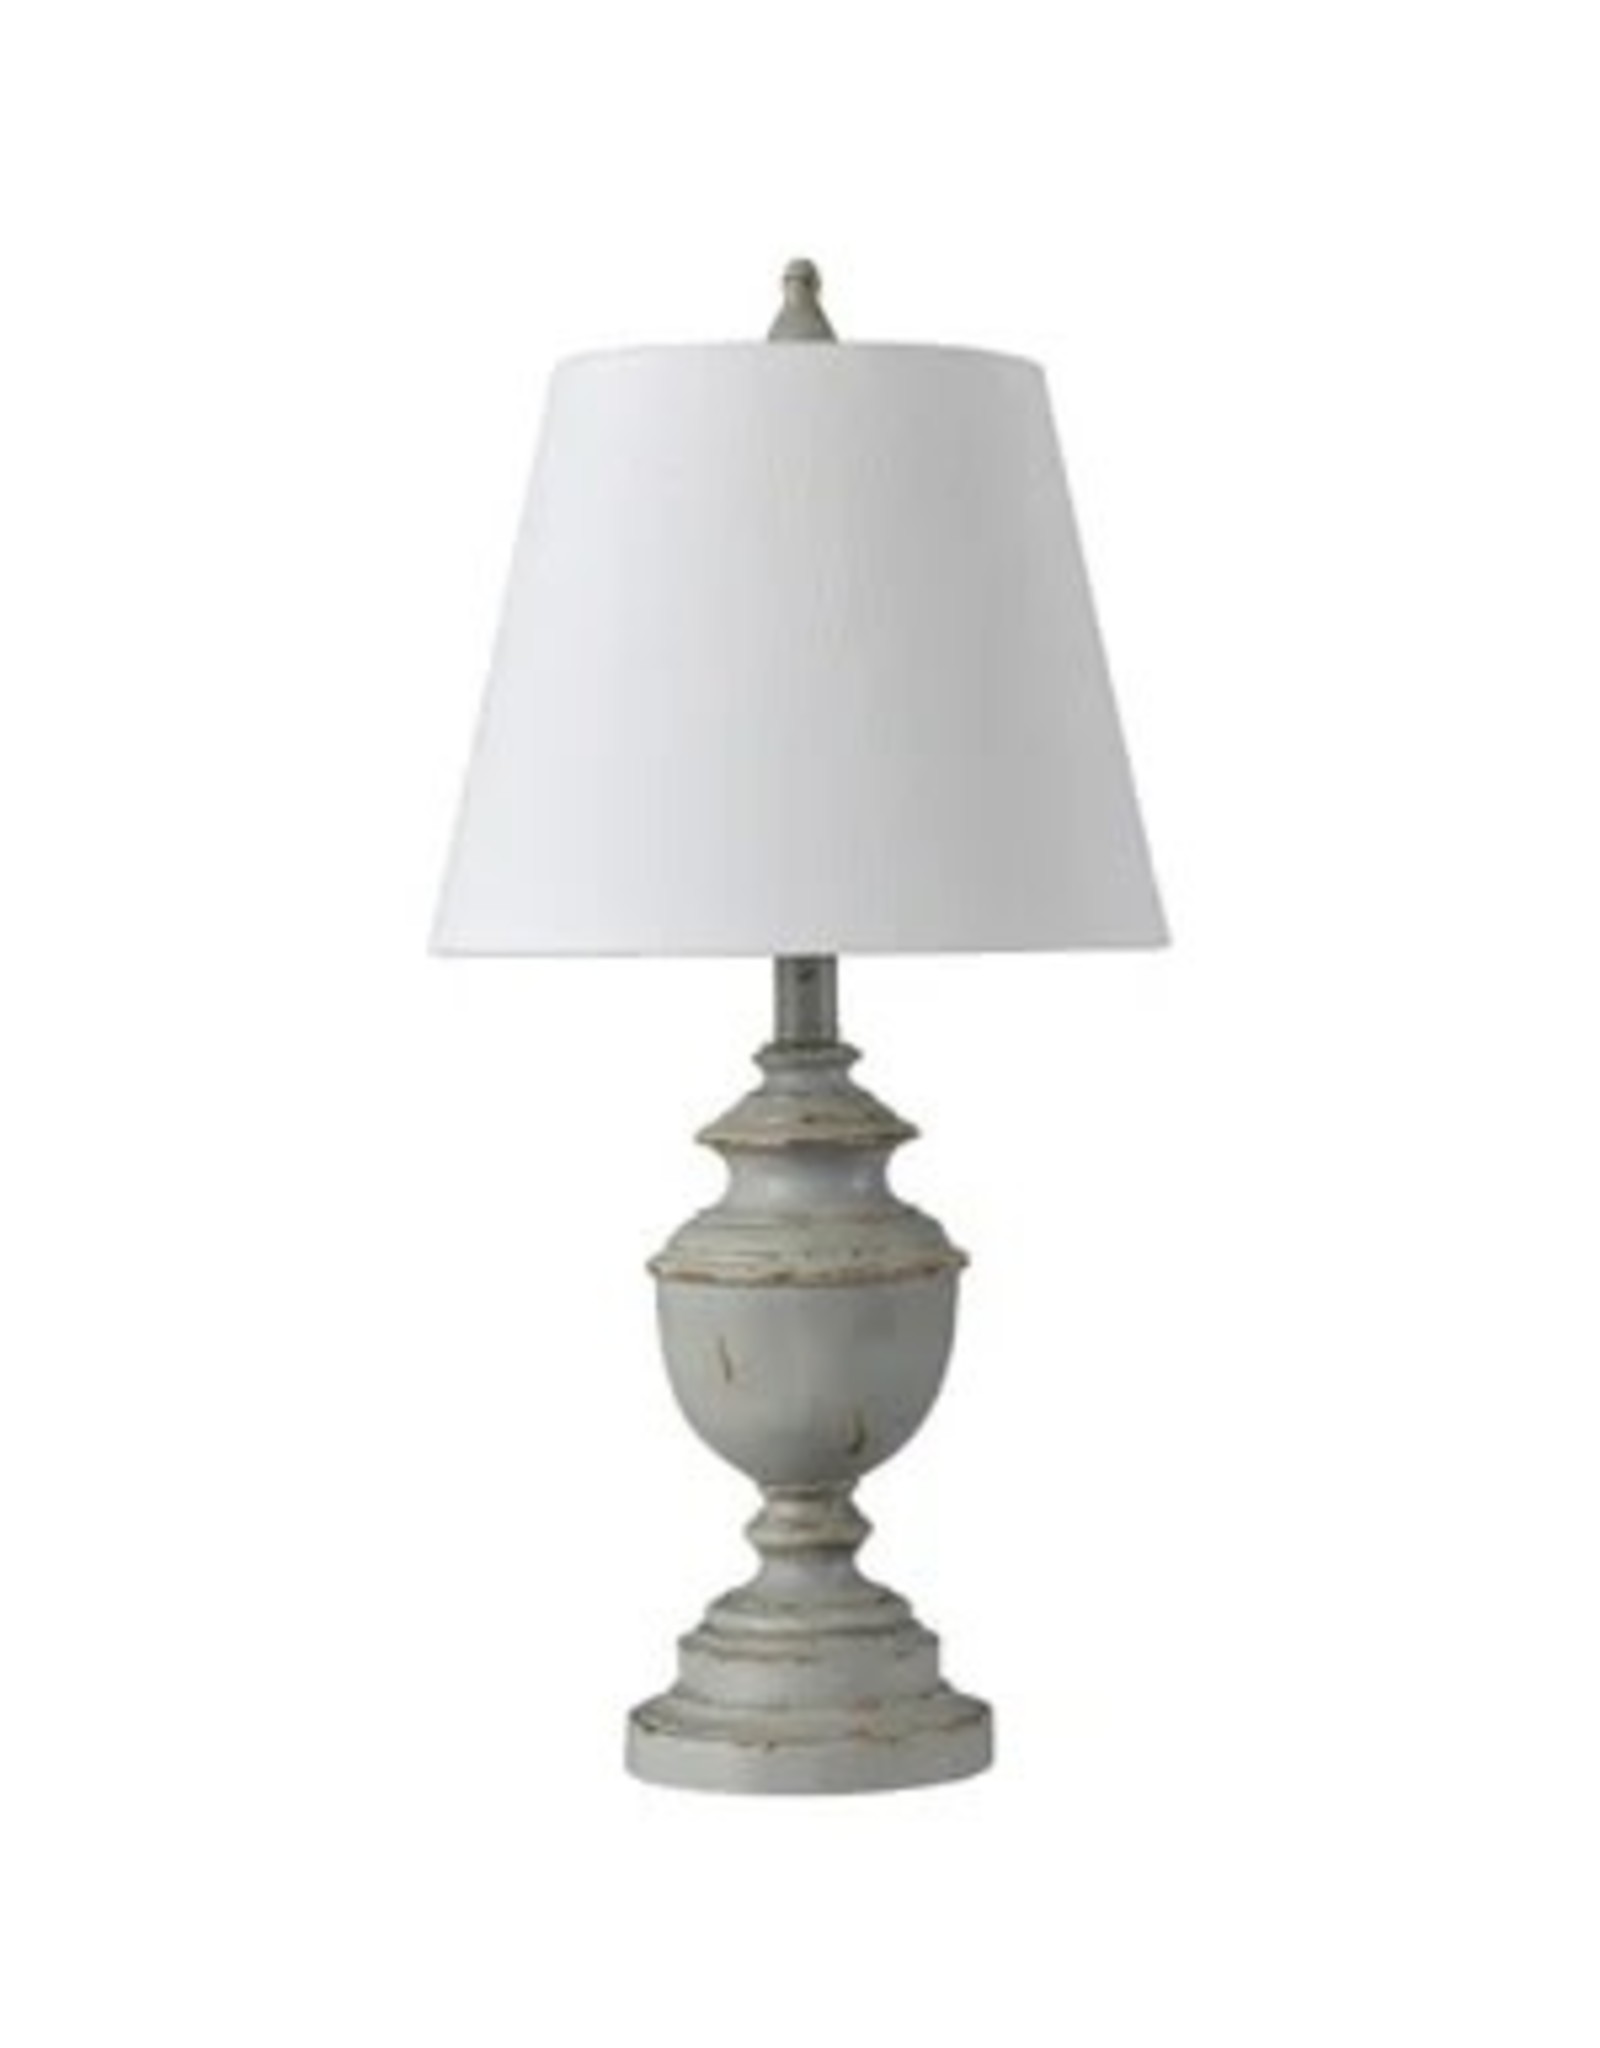 KHL210947 Classic Traditional Accent Table Lamp